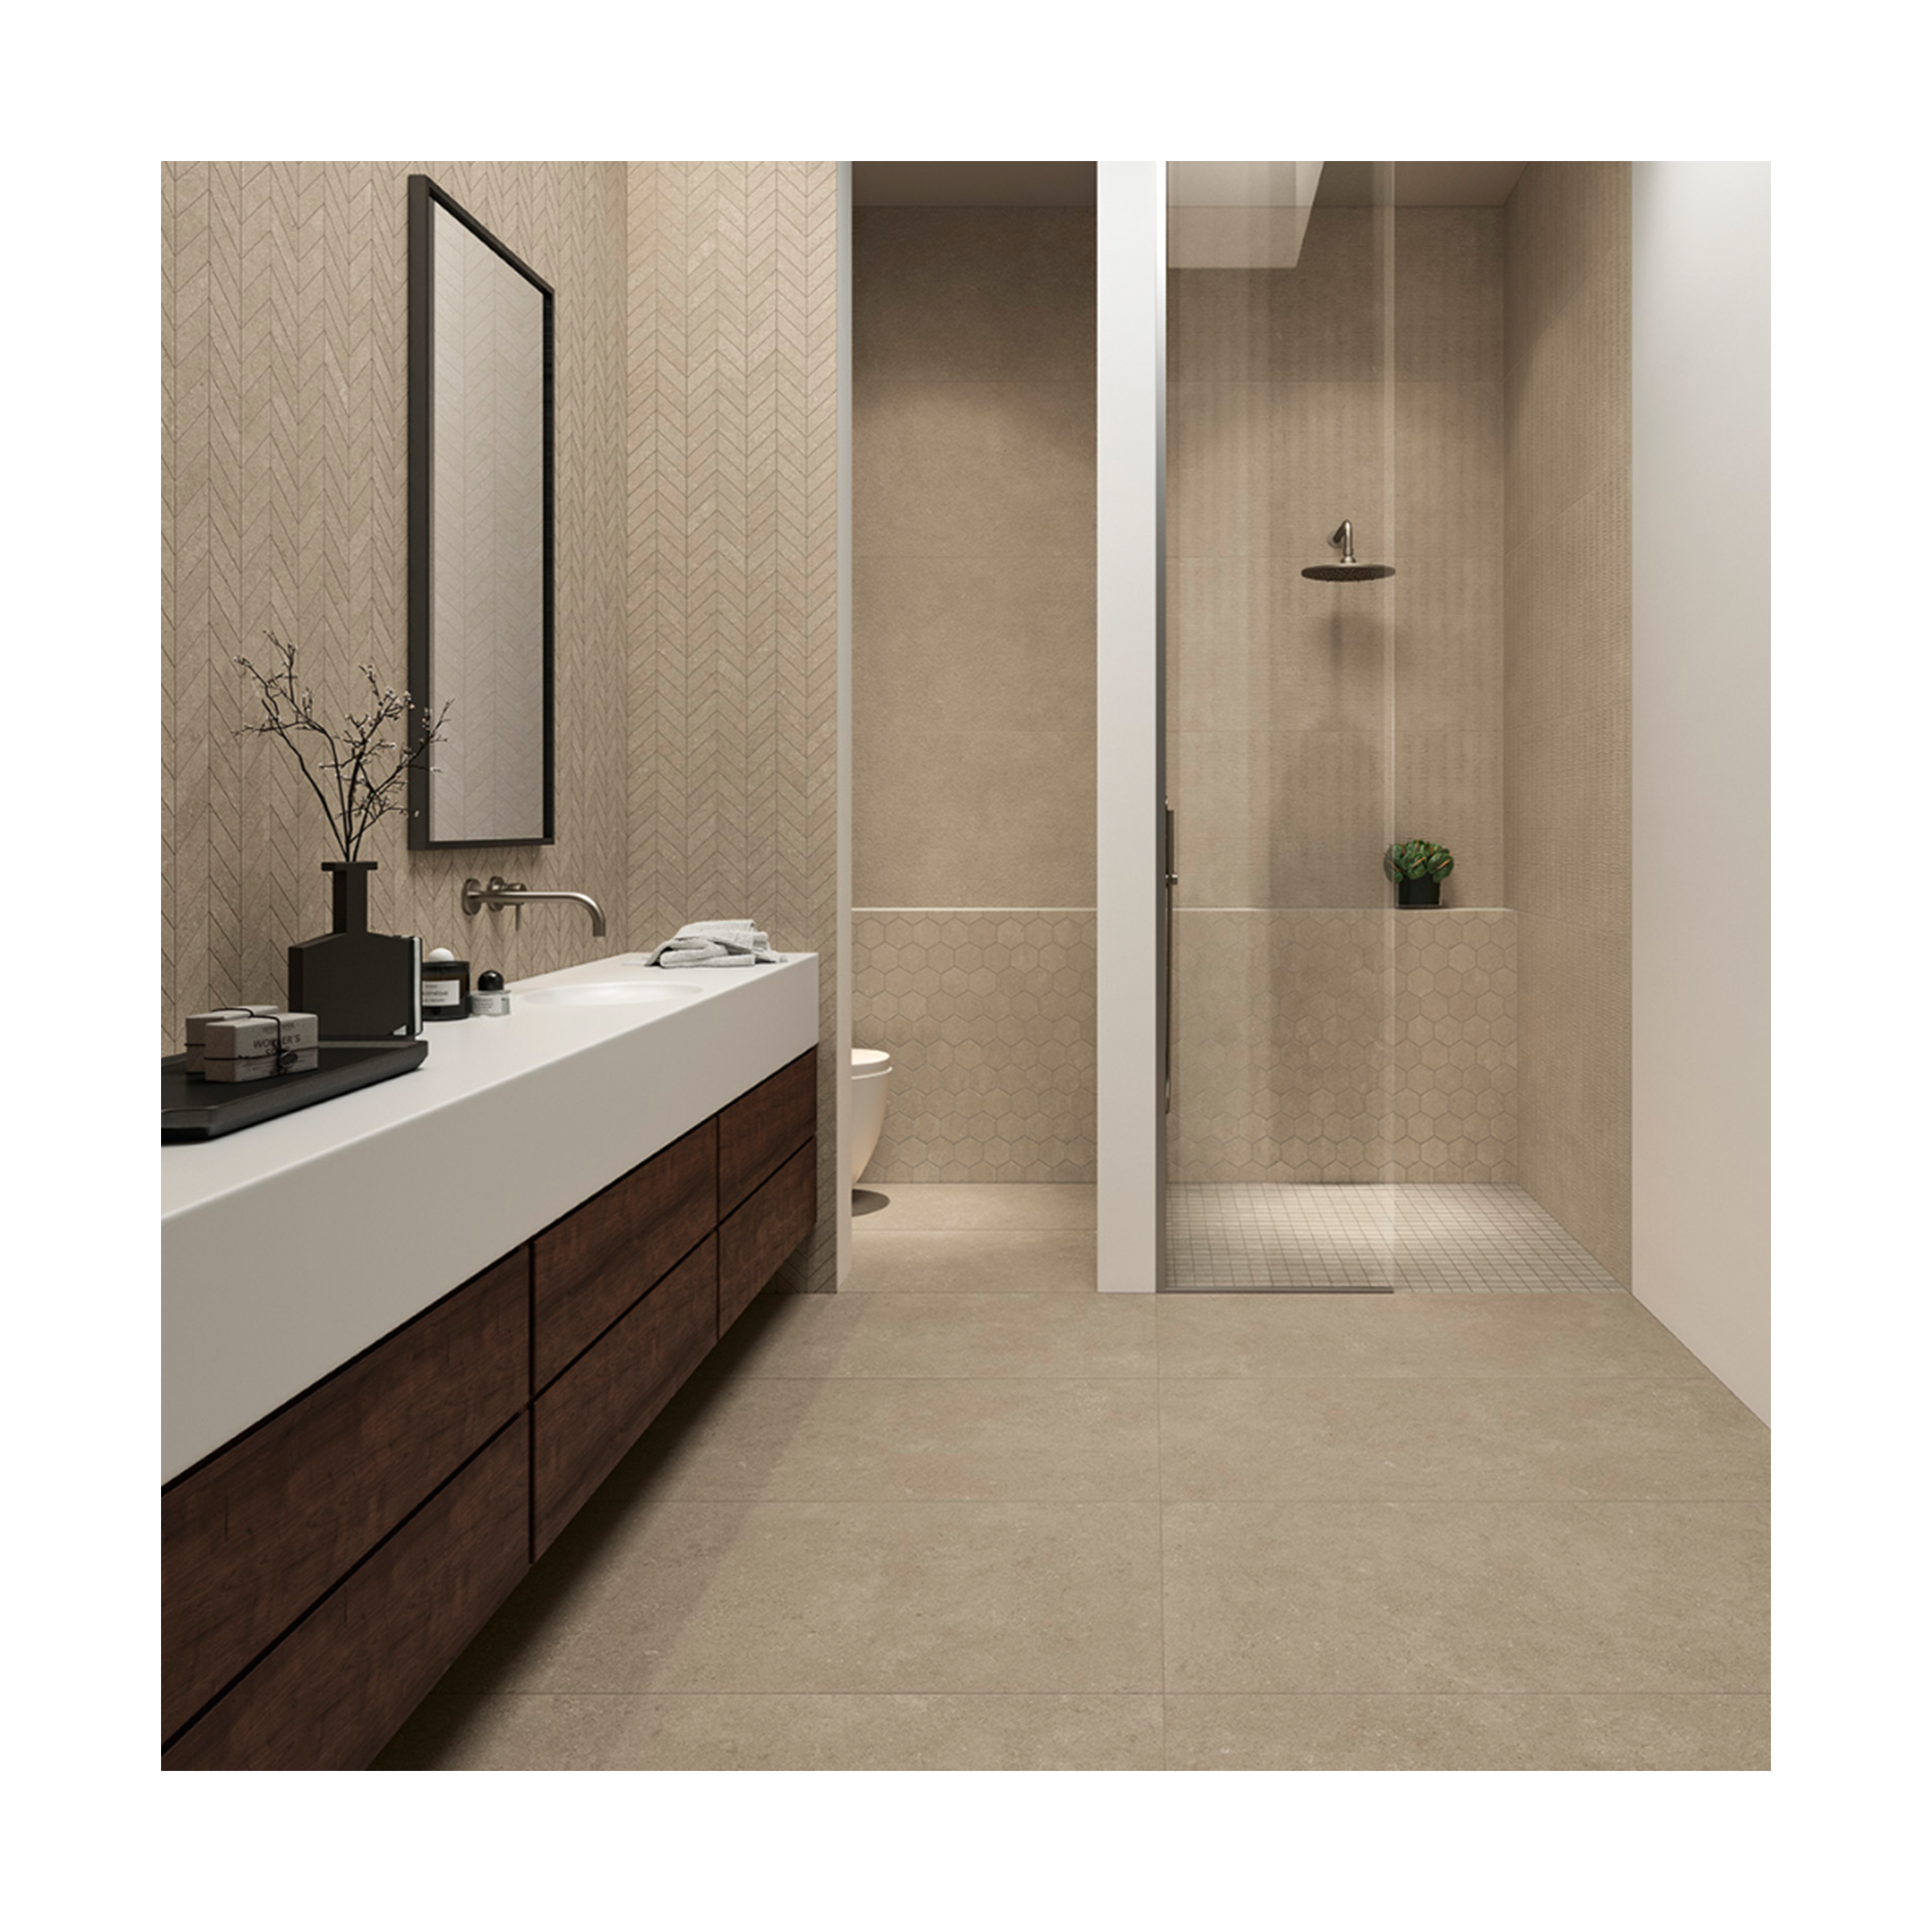 Limestone Blanched Almond Rectified Porcelain Tile 24x24